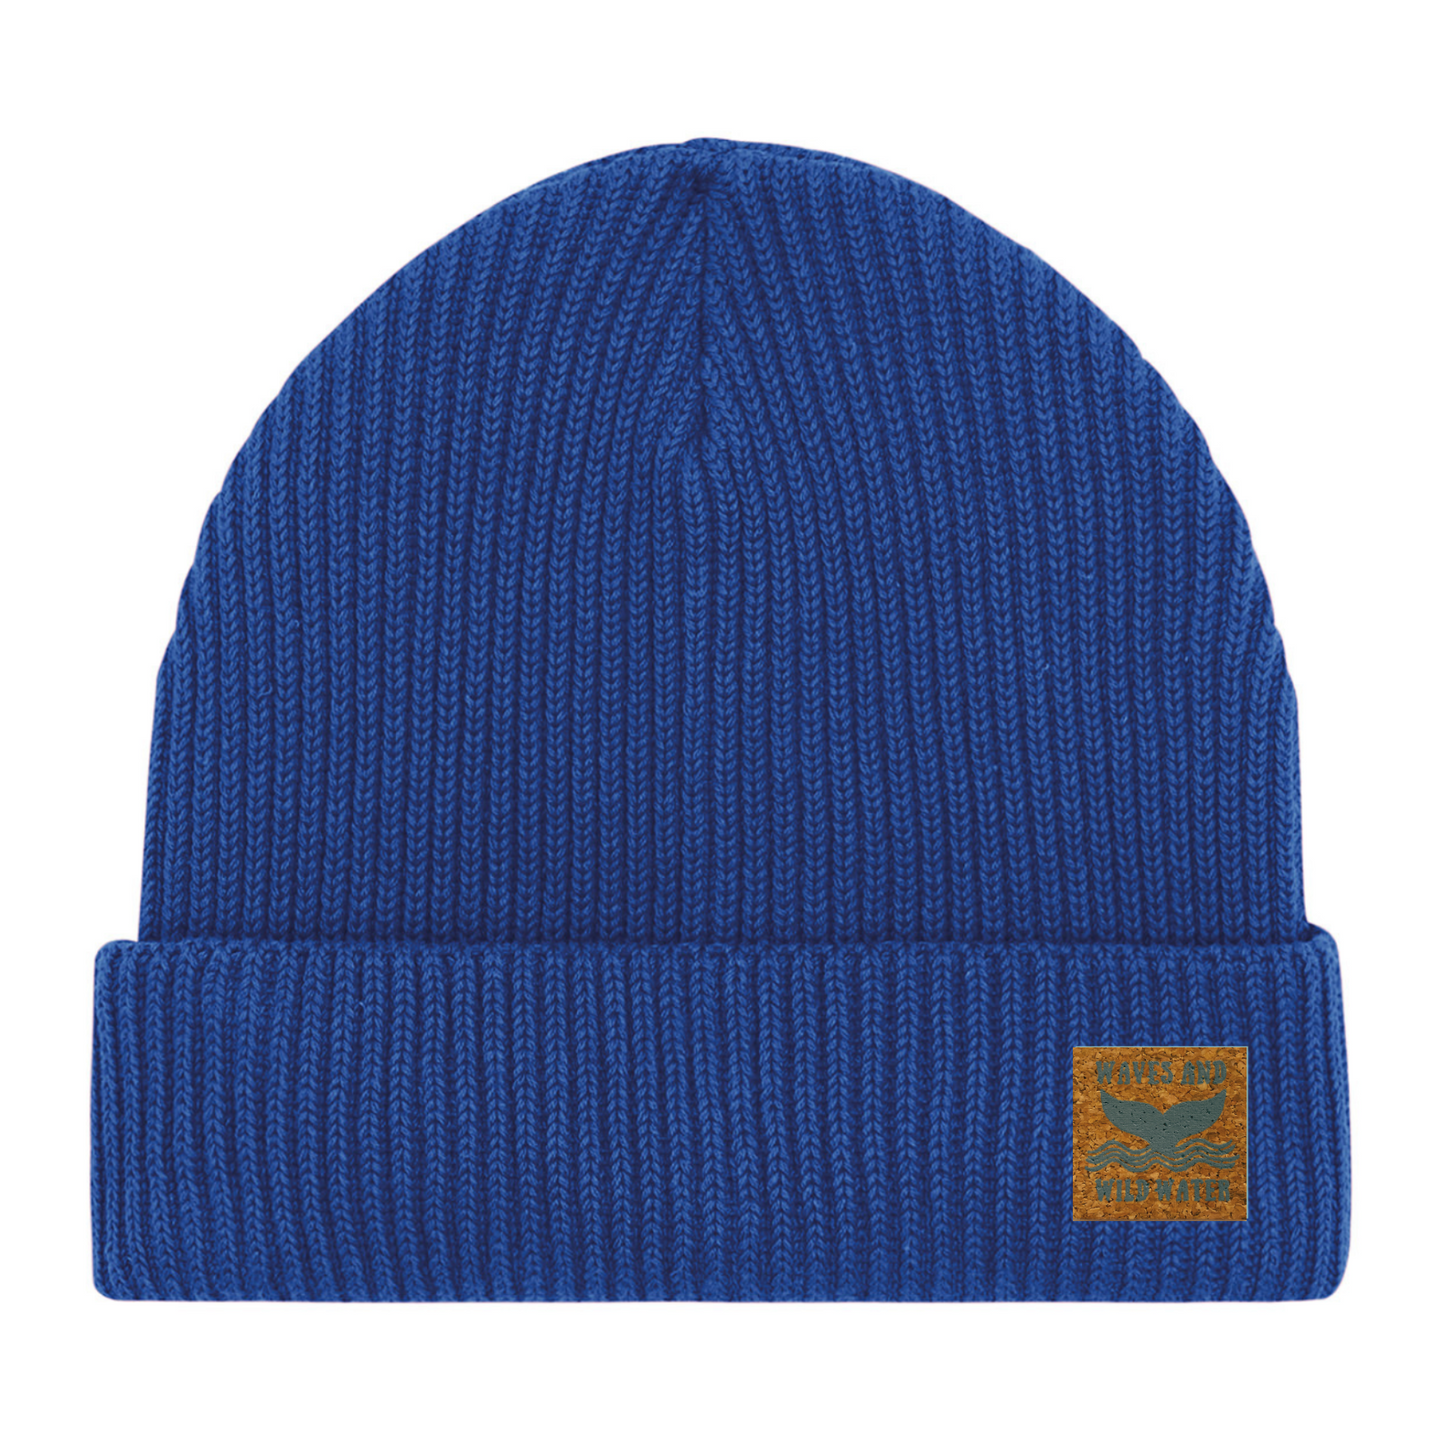 A bright blue fisherman beanie hat with a Waves & Wild Water label. 